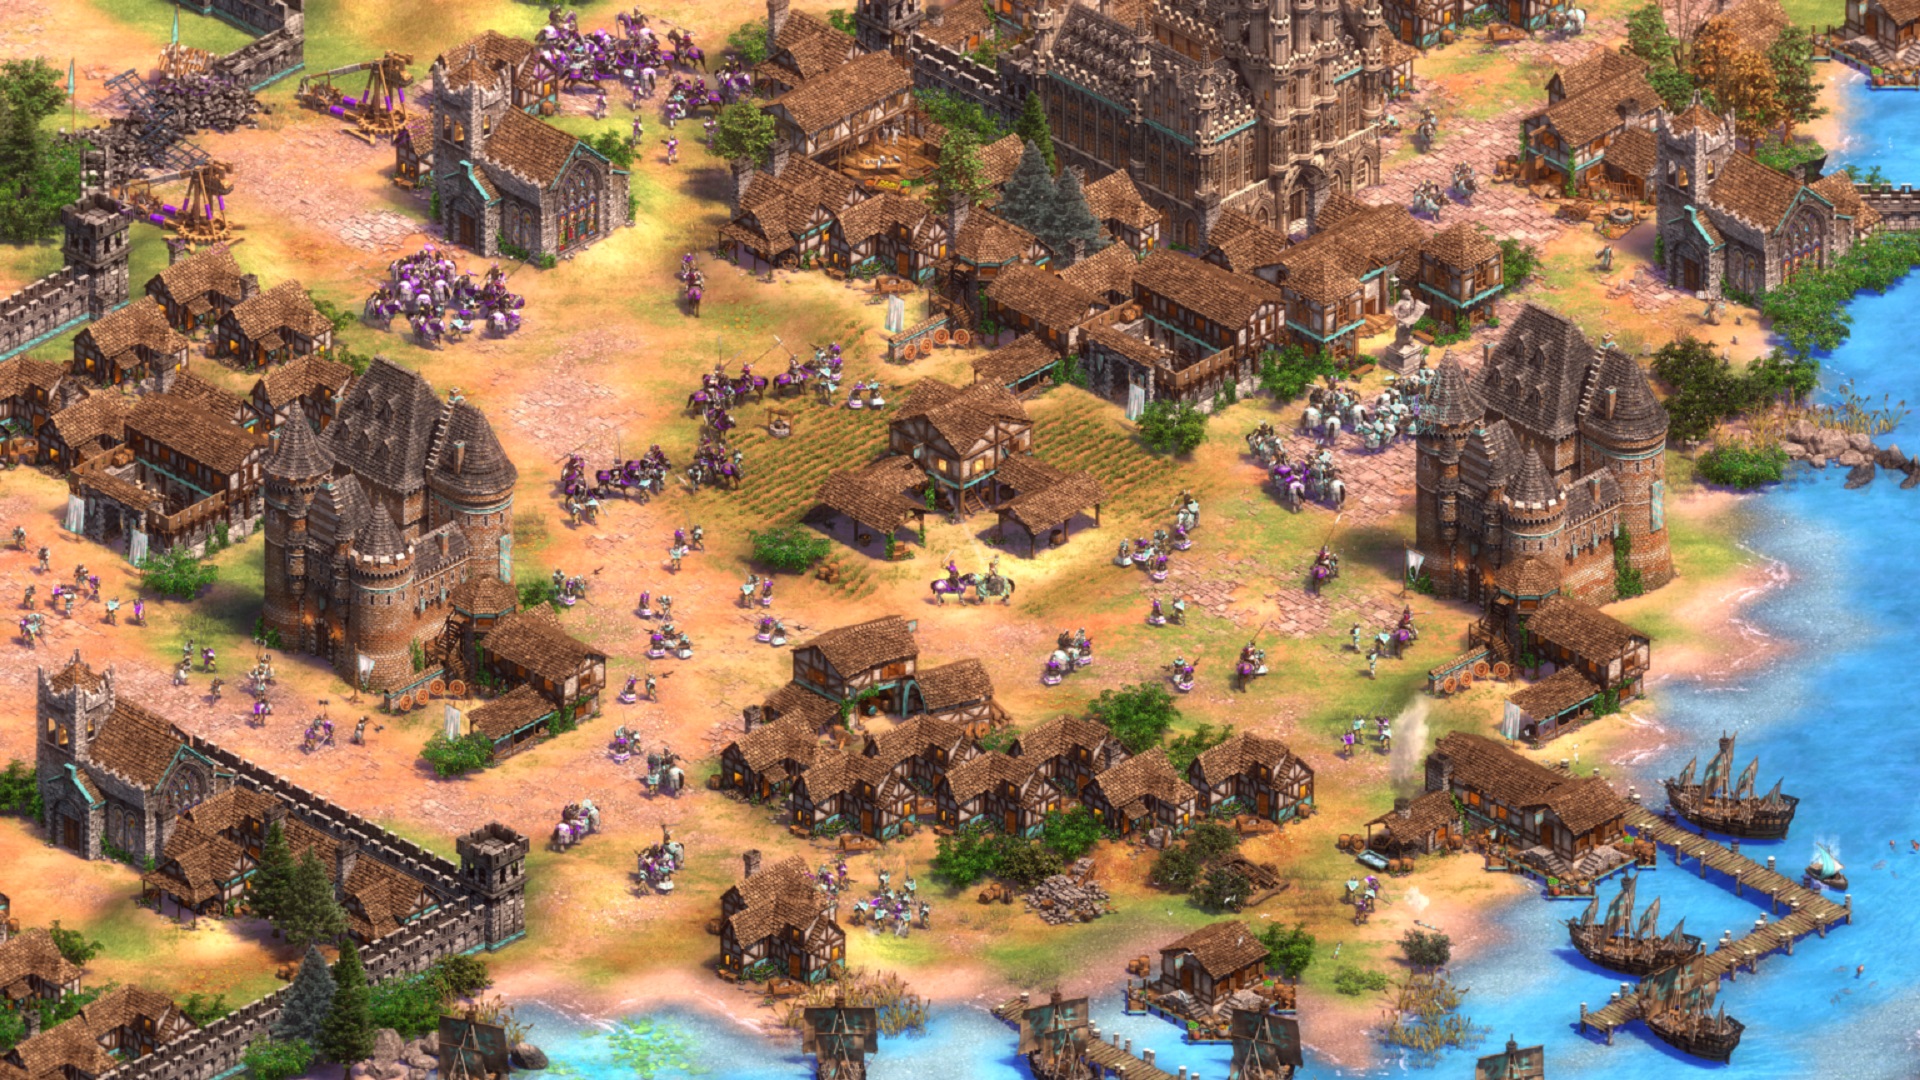 age-of-empires-2-de-s-first-expansion-adds-new-civs-and-campaigns